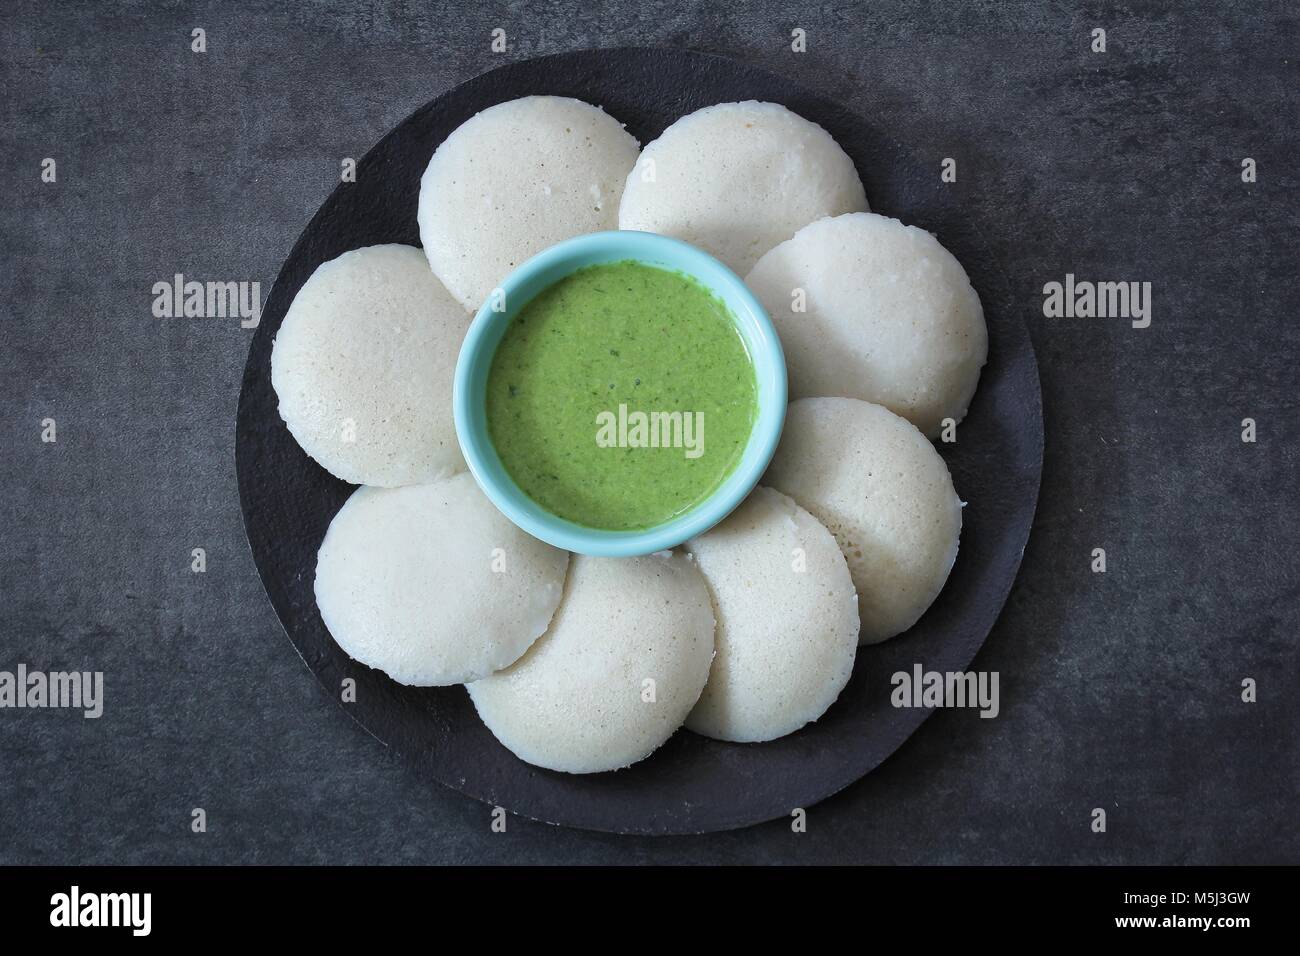 Idli / Idly food South Indian breakfast with chutney top view Stock Photo